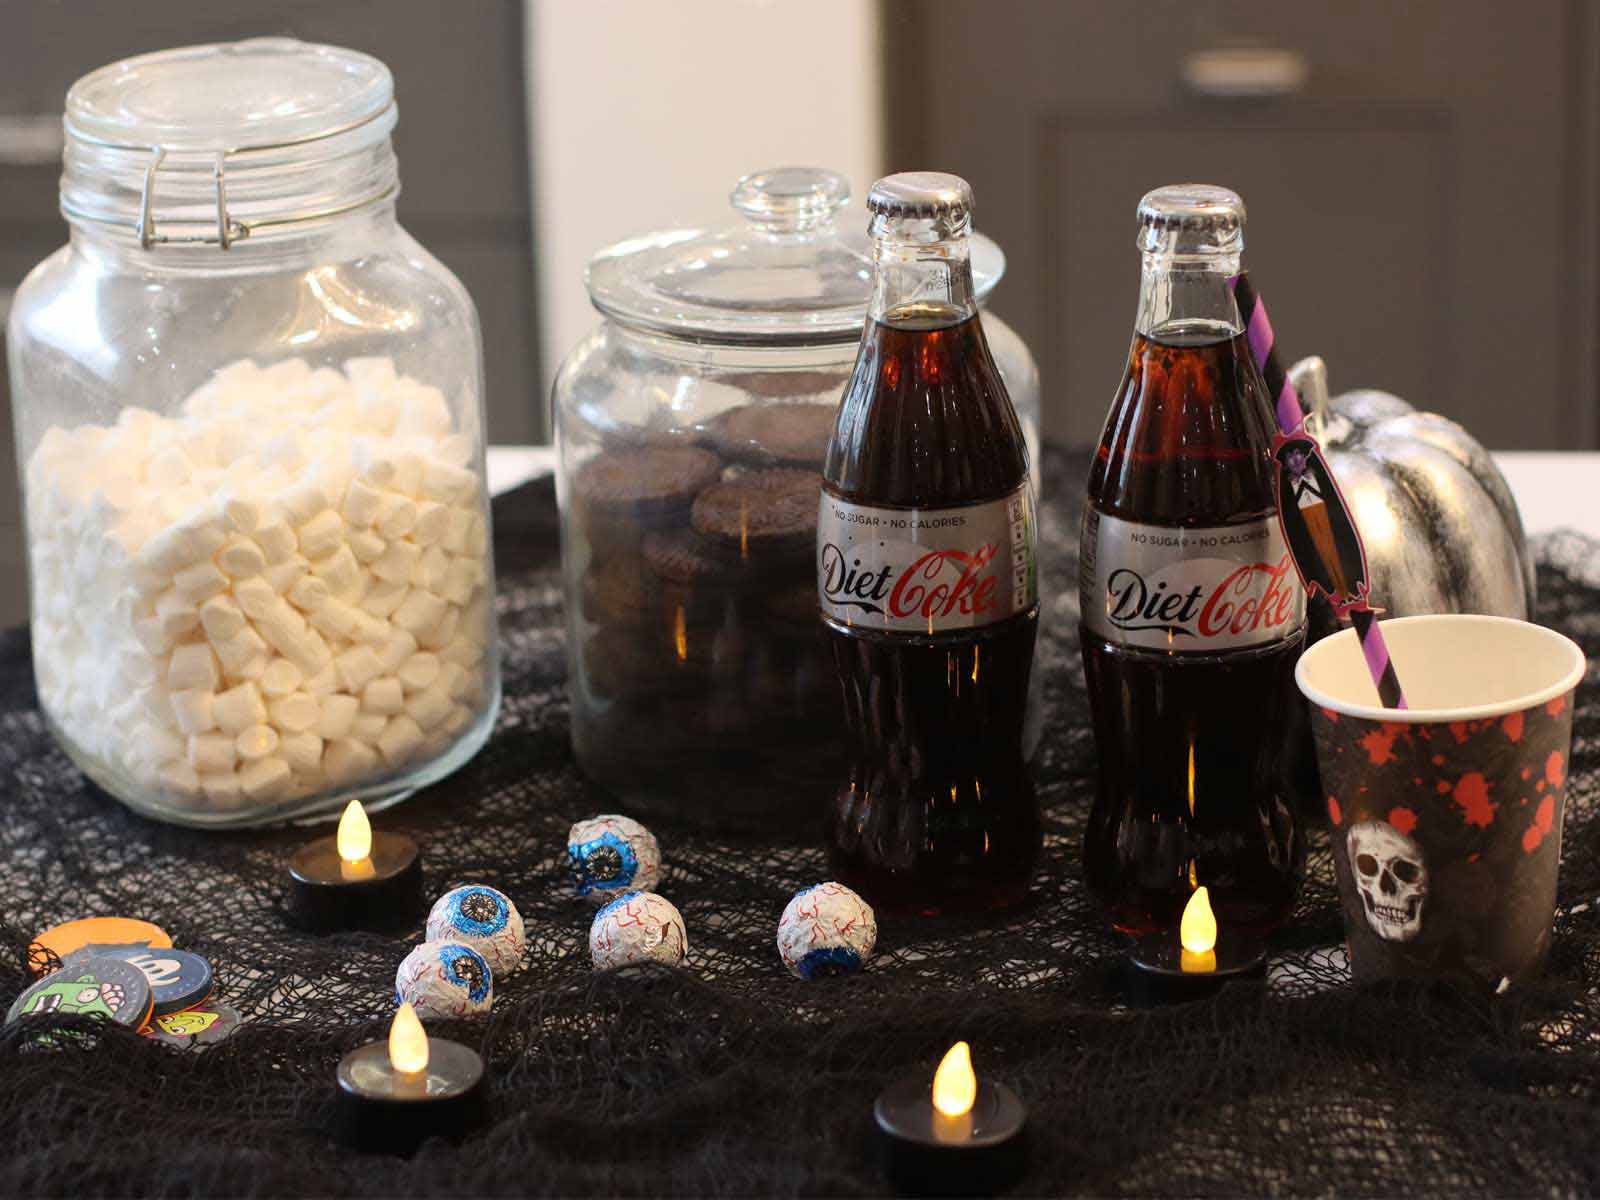 Halloween party drinks for kids, along with biscuits and props